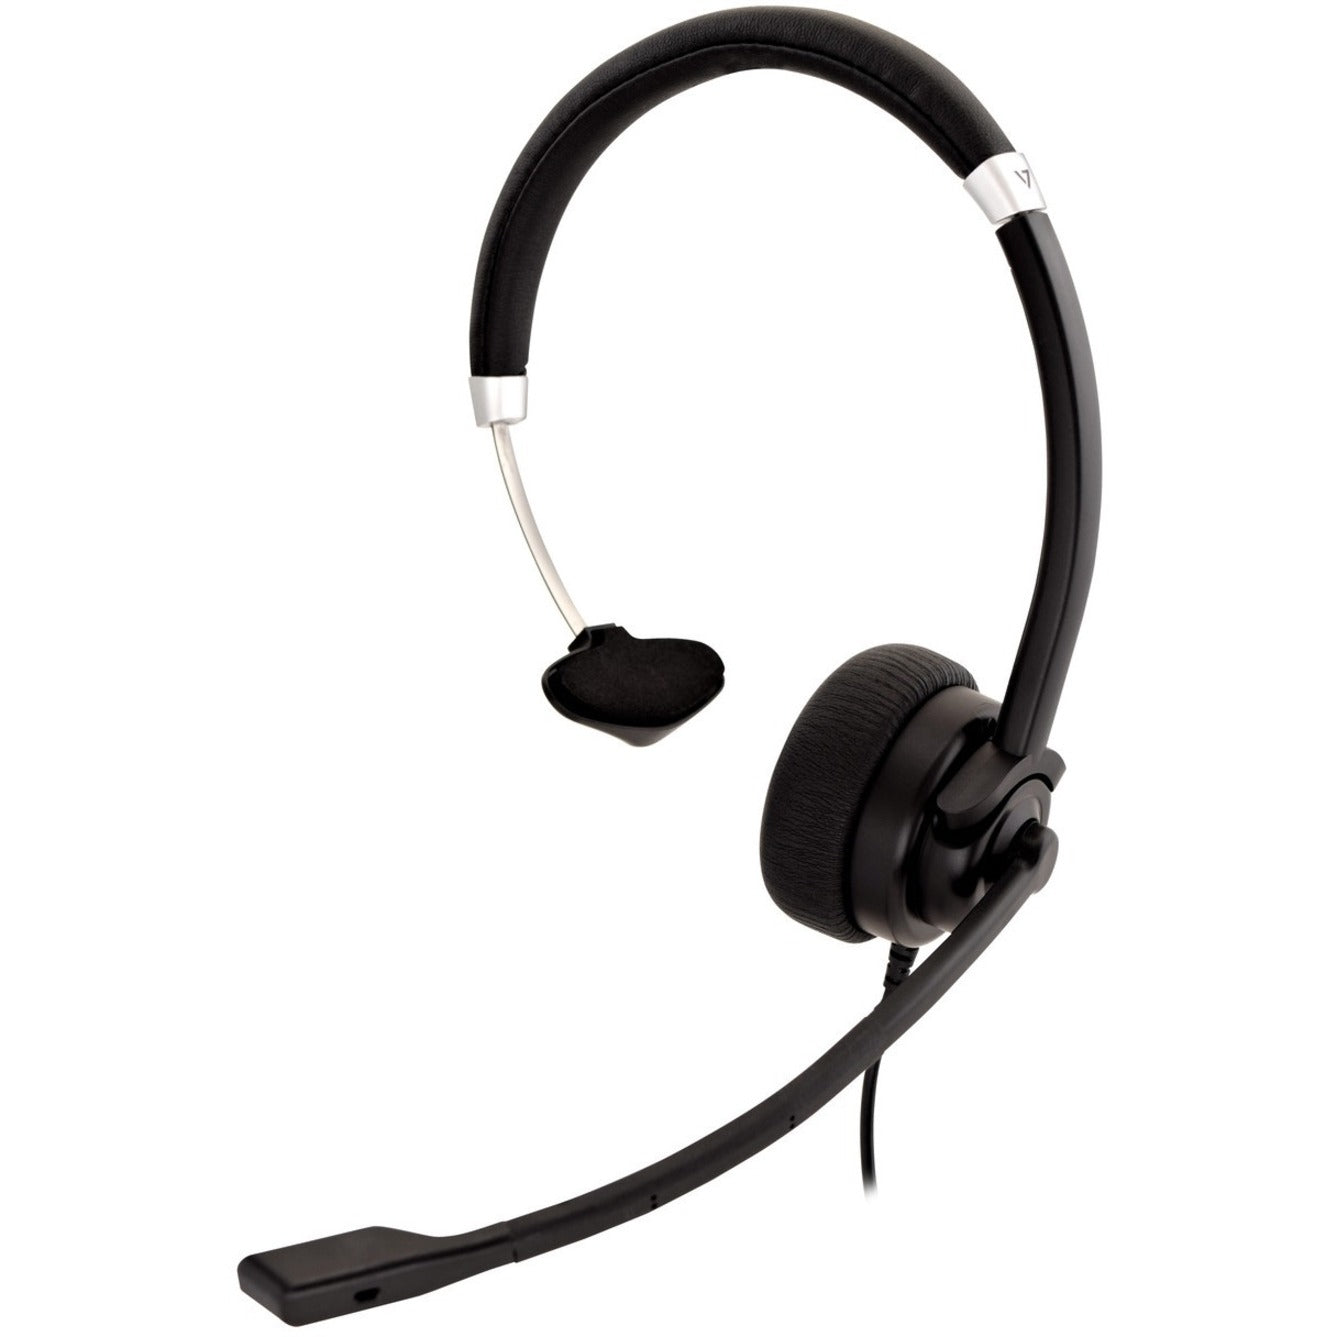 V7 HA401 Deluxe Mono Headset, Over-the-head Wired Headset with Noise Cancelling Microphone